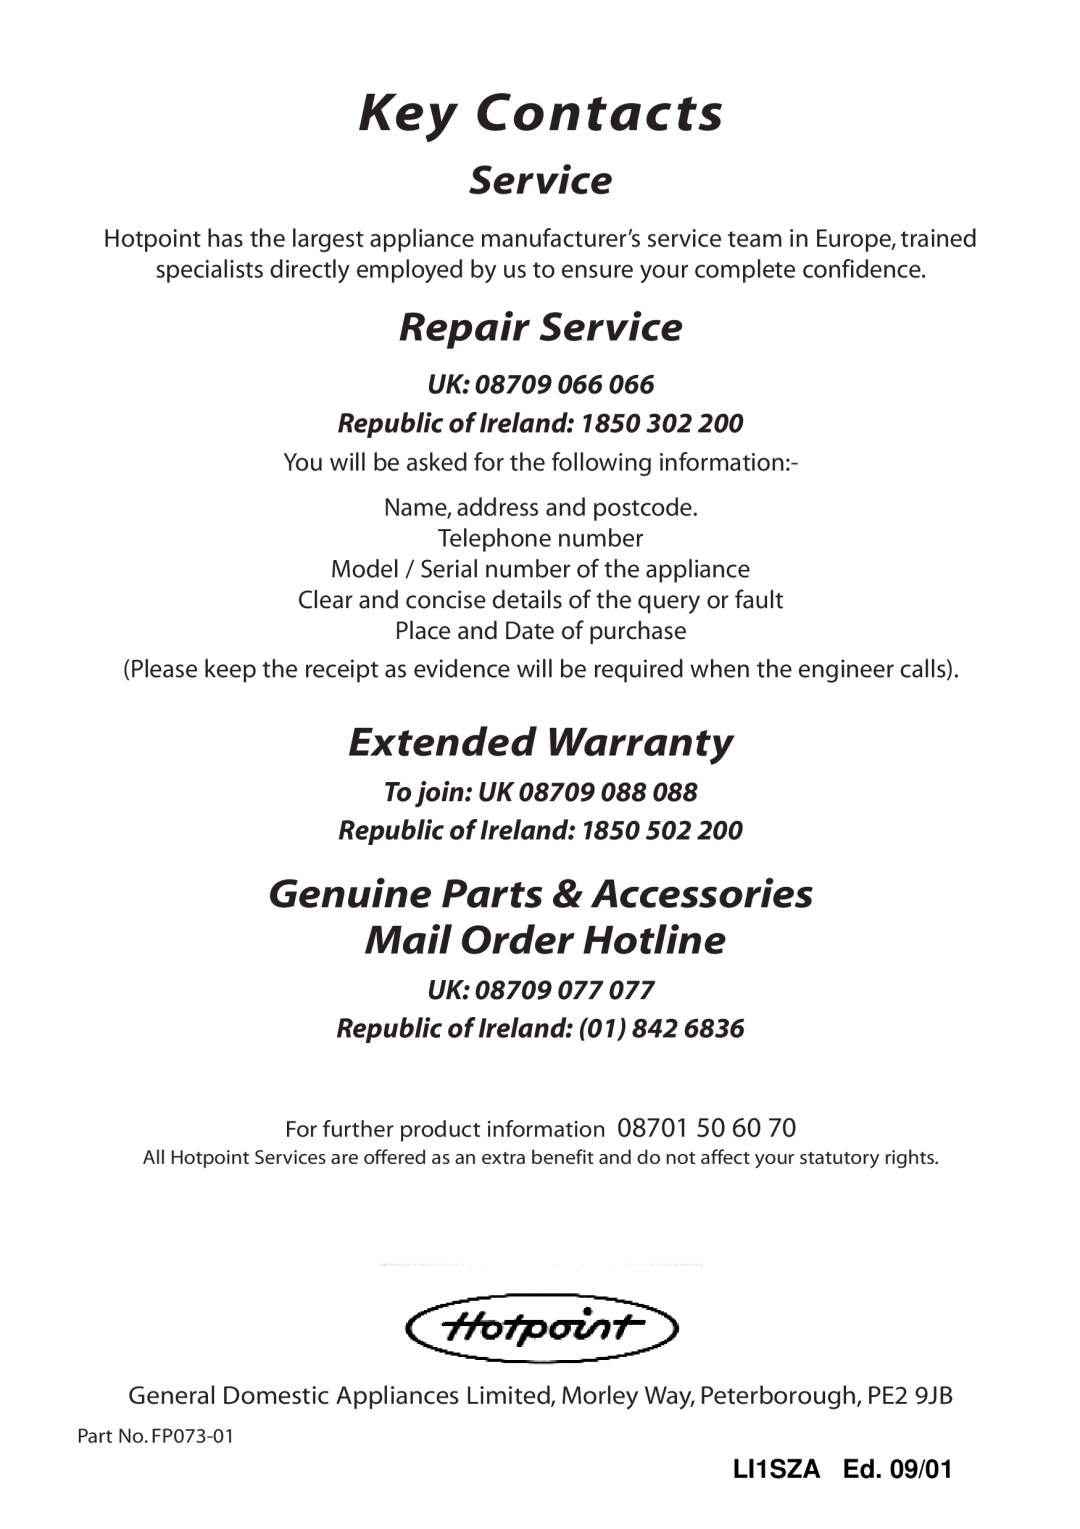 Hotpoint HTV10 manual Key Contacts, Repair Service, Extended Warranty, Genuine Parts & Accessories Mail Order Hotline 